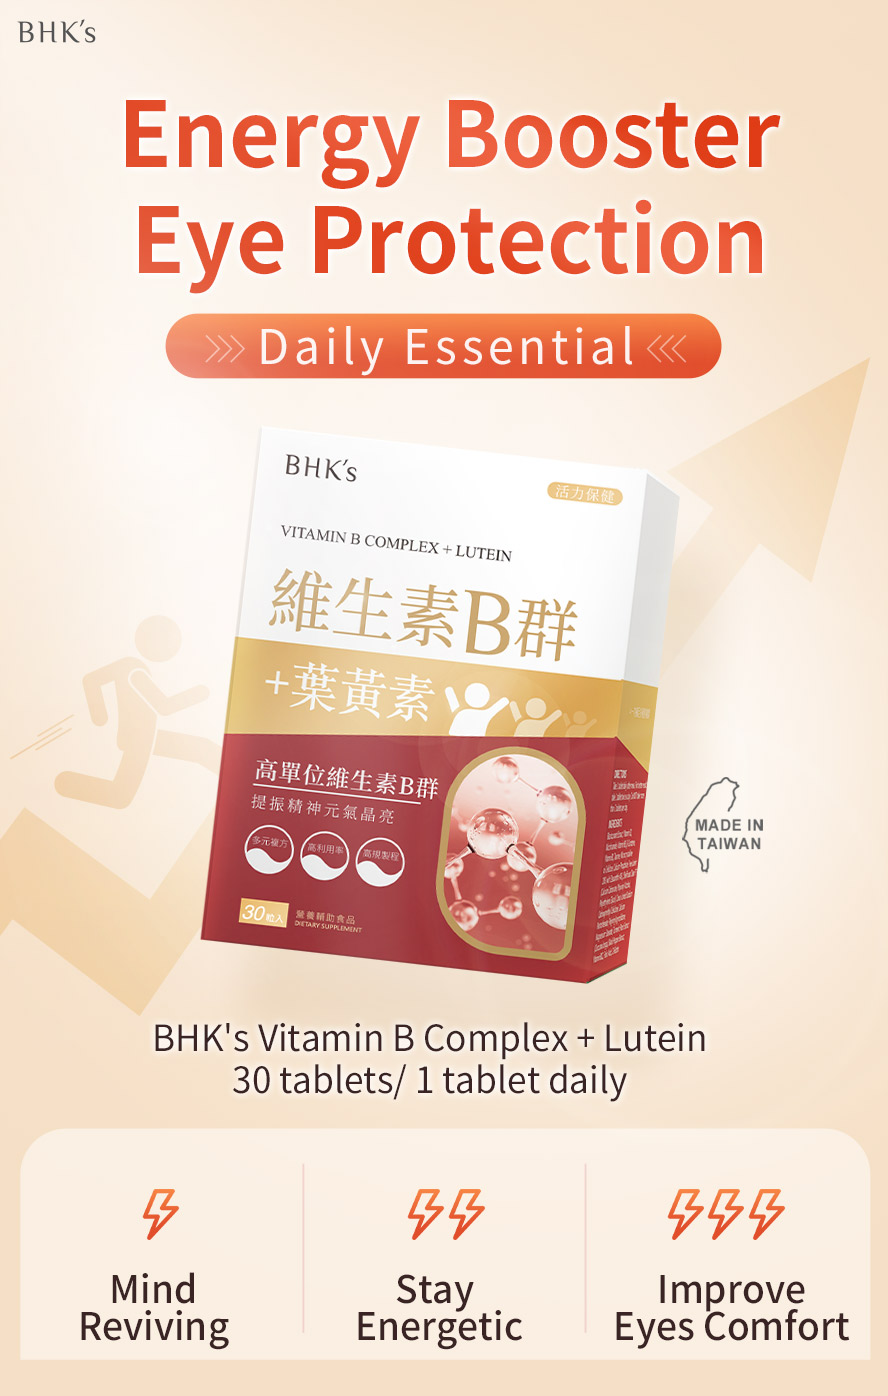 BHK's Vitamin B Complex + Lutein is a daily essential to help revive minde, boost energy, and improve eyes comfort